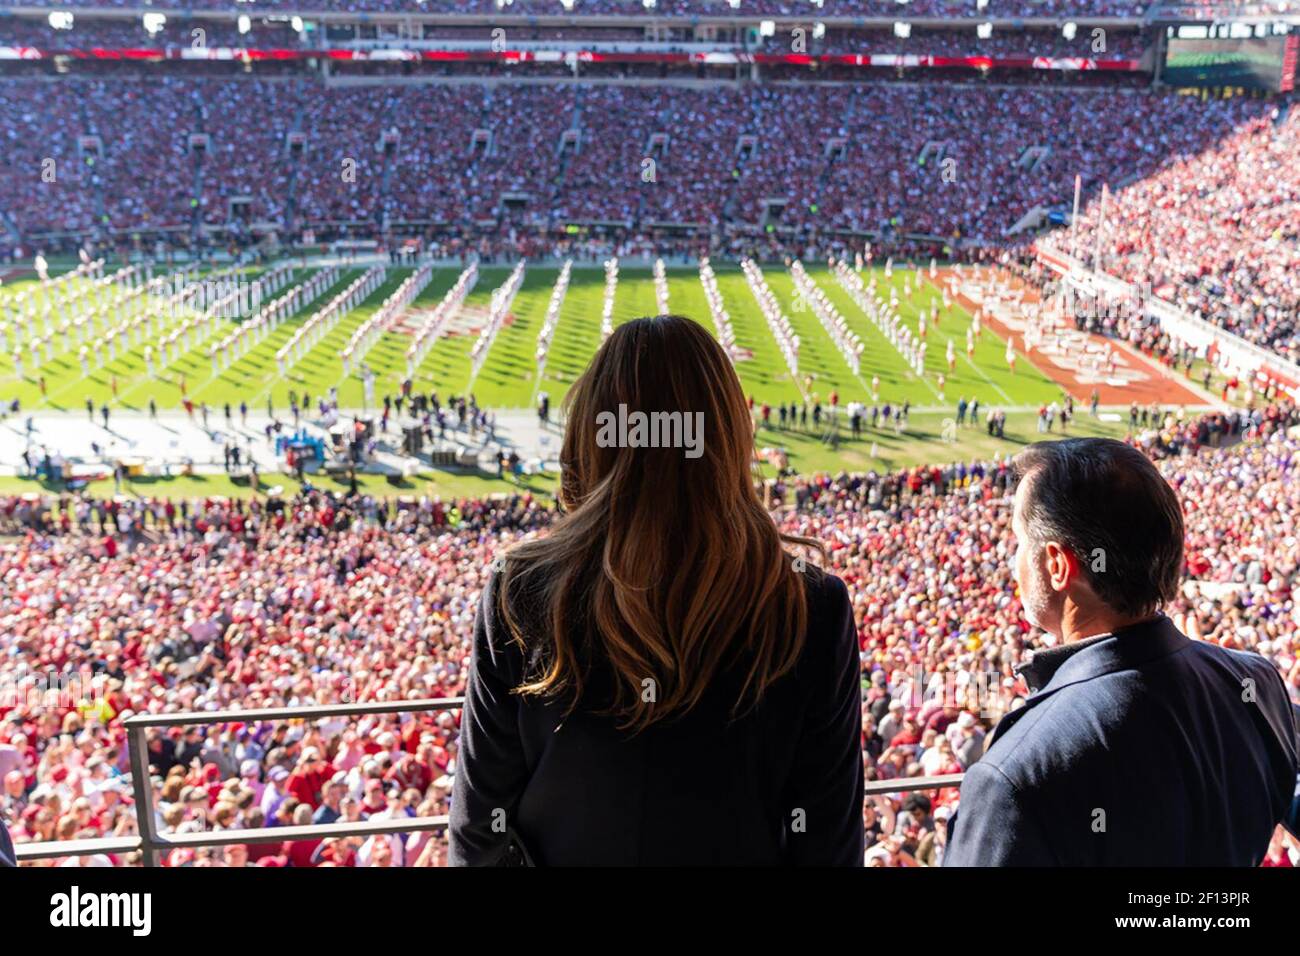 First Lady Melania Trump watches the action on the field at Bryant-Denny Stadium Saturday Nov. 9 2019 while attending the University of Alabama -Louisiana State University football game in Tuscaloosa Ala. Stock Photo